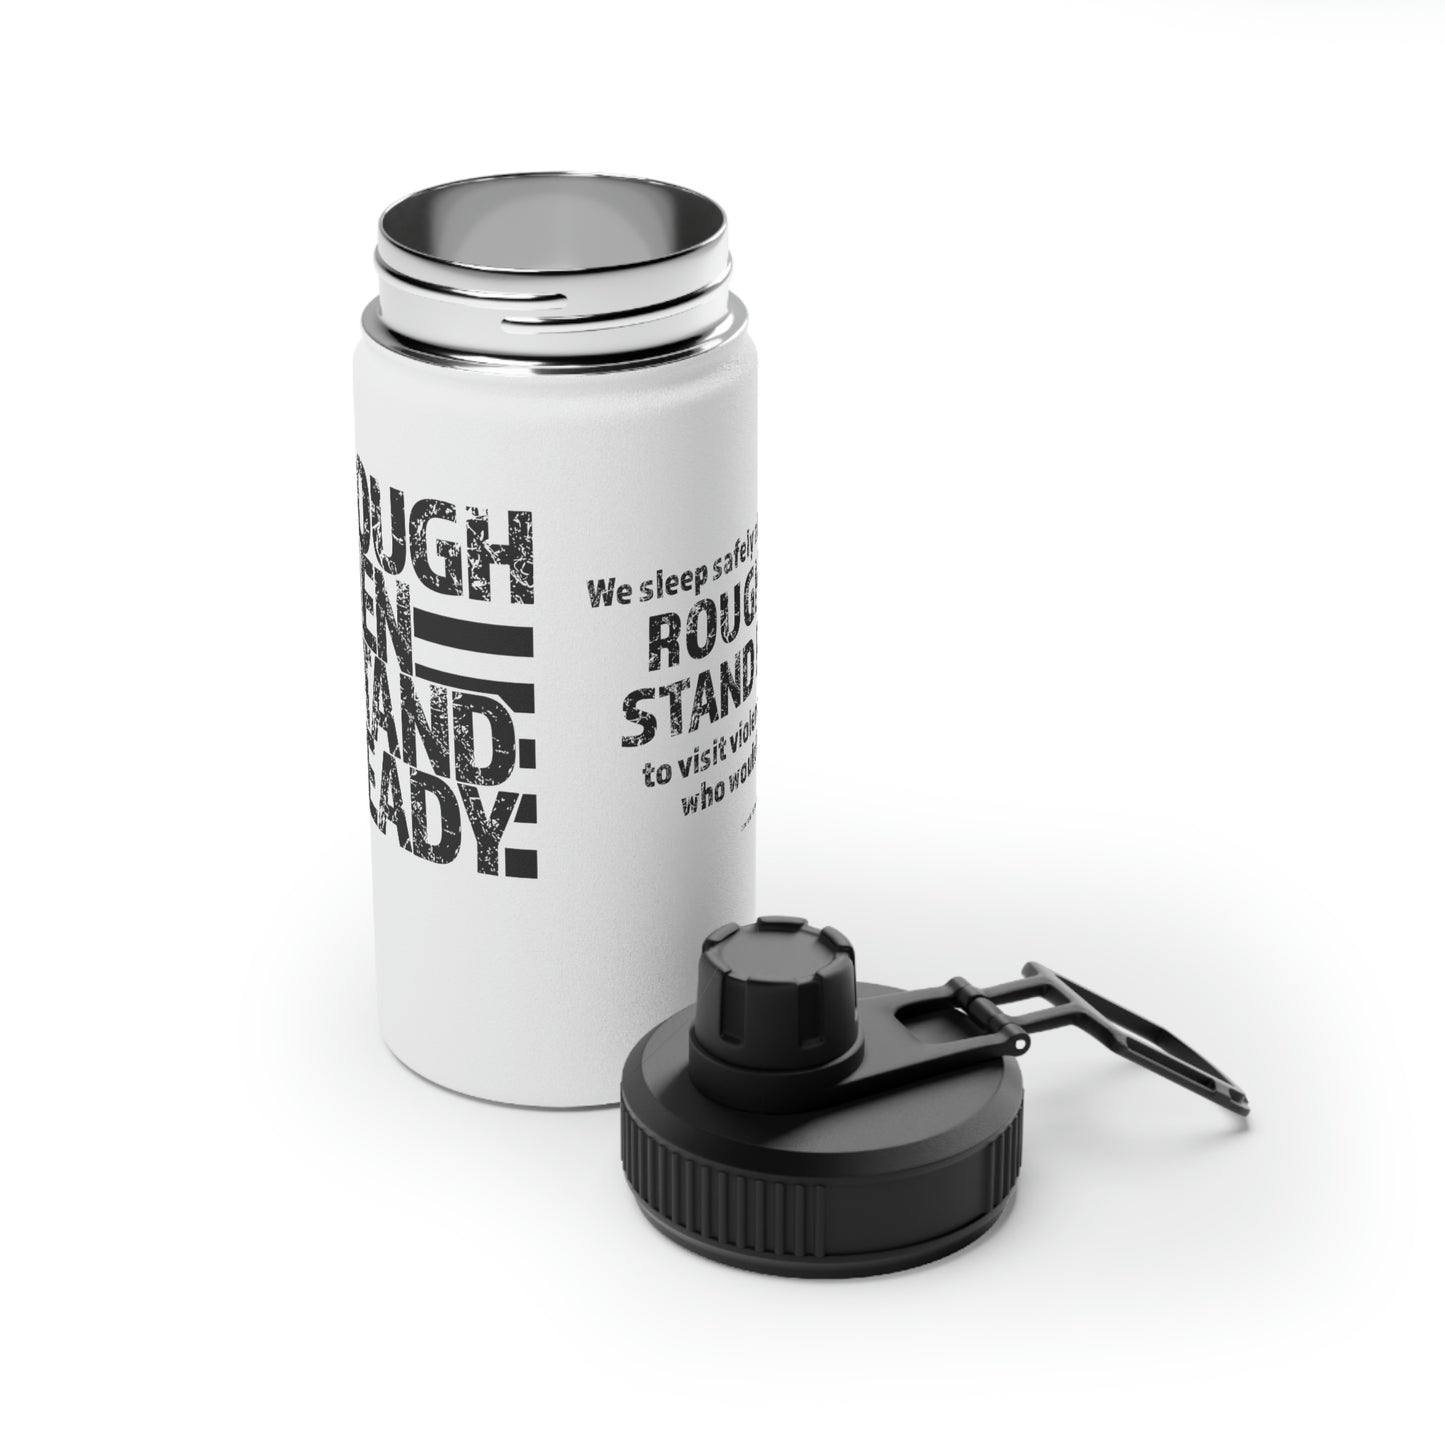 Rough Men Stand Ready Stainless Steel Water Bottle, Sports Lid, Various Sizes